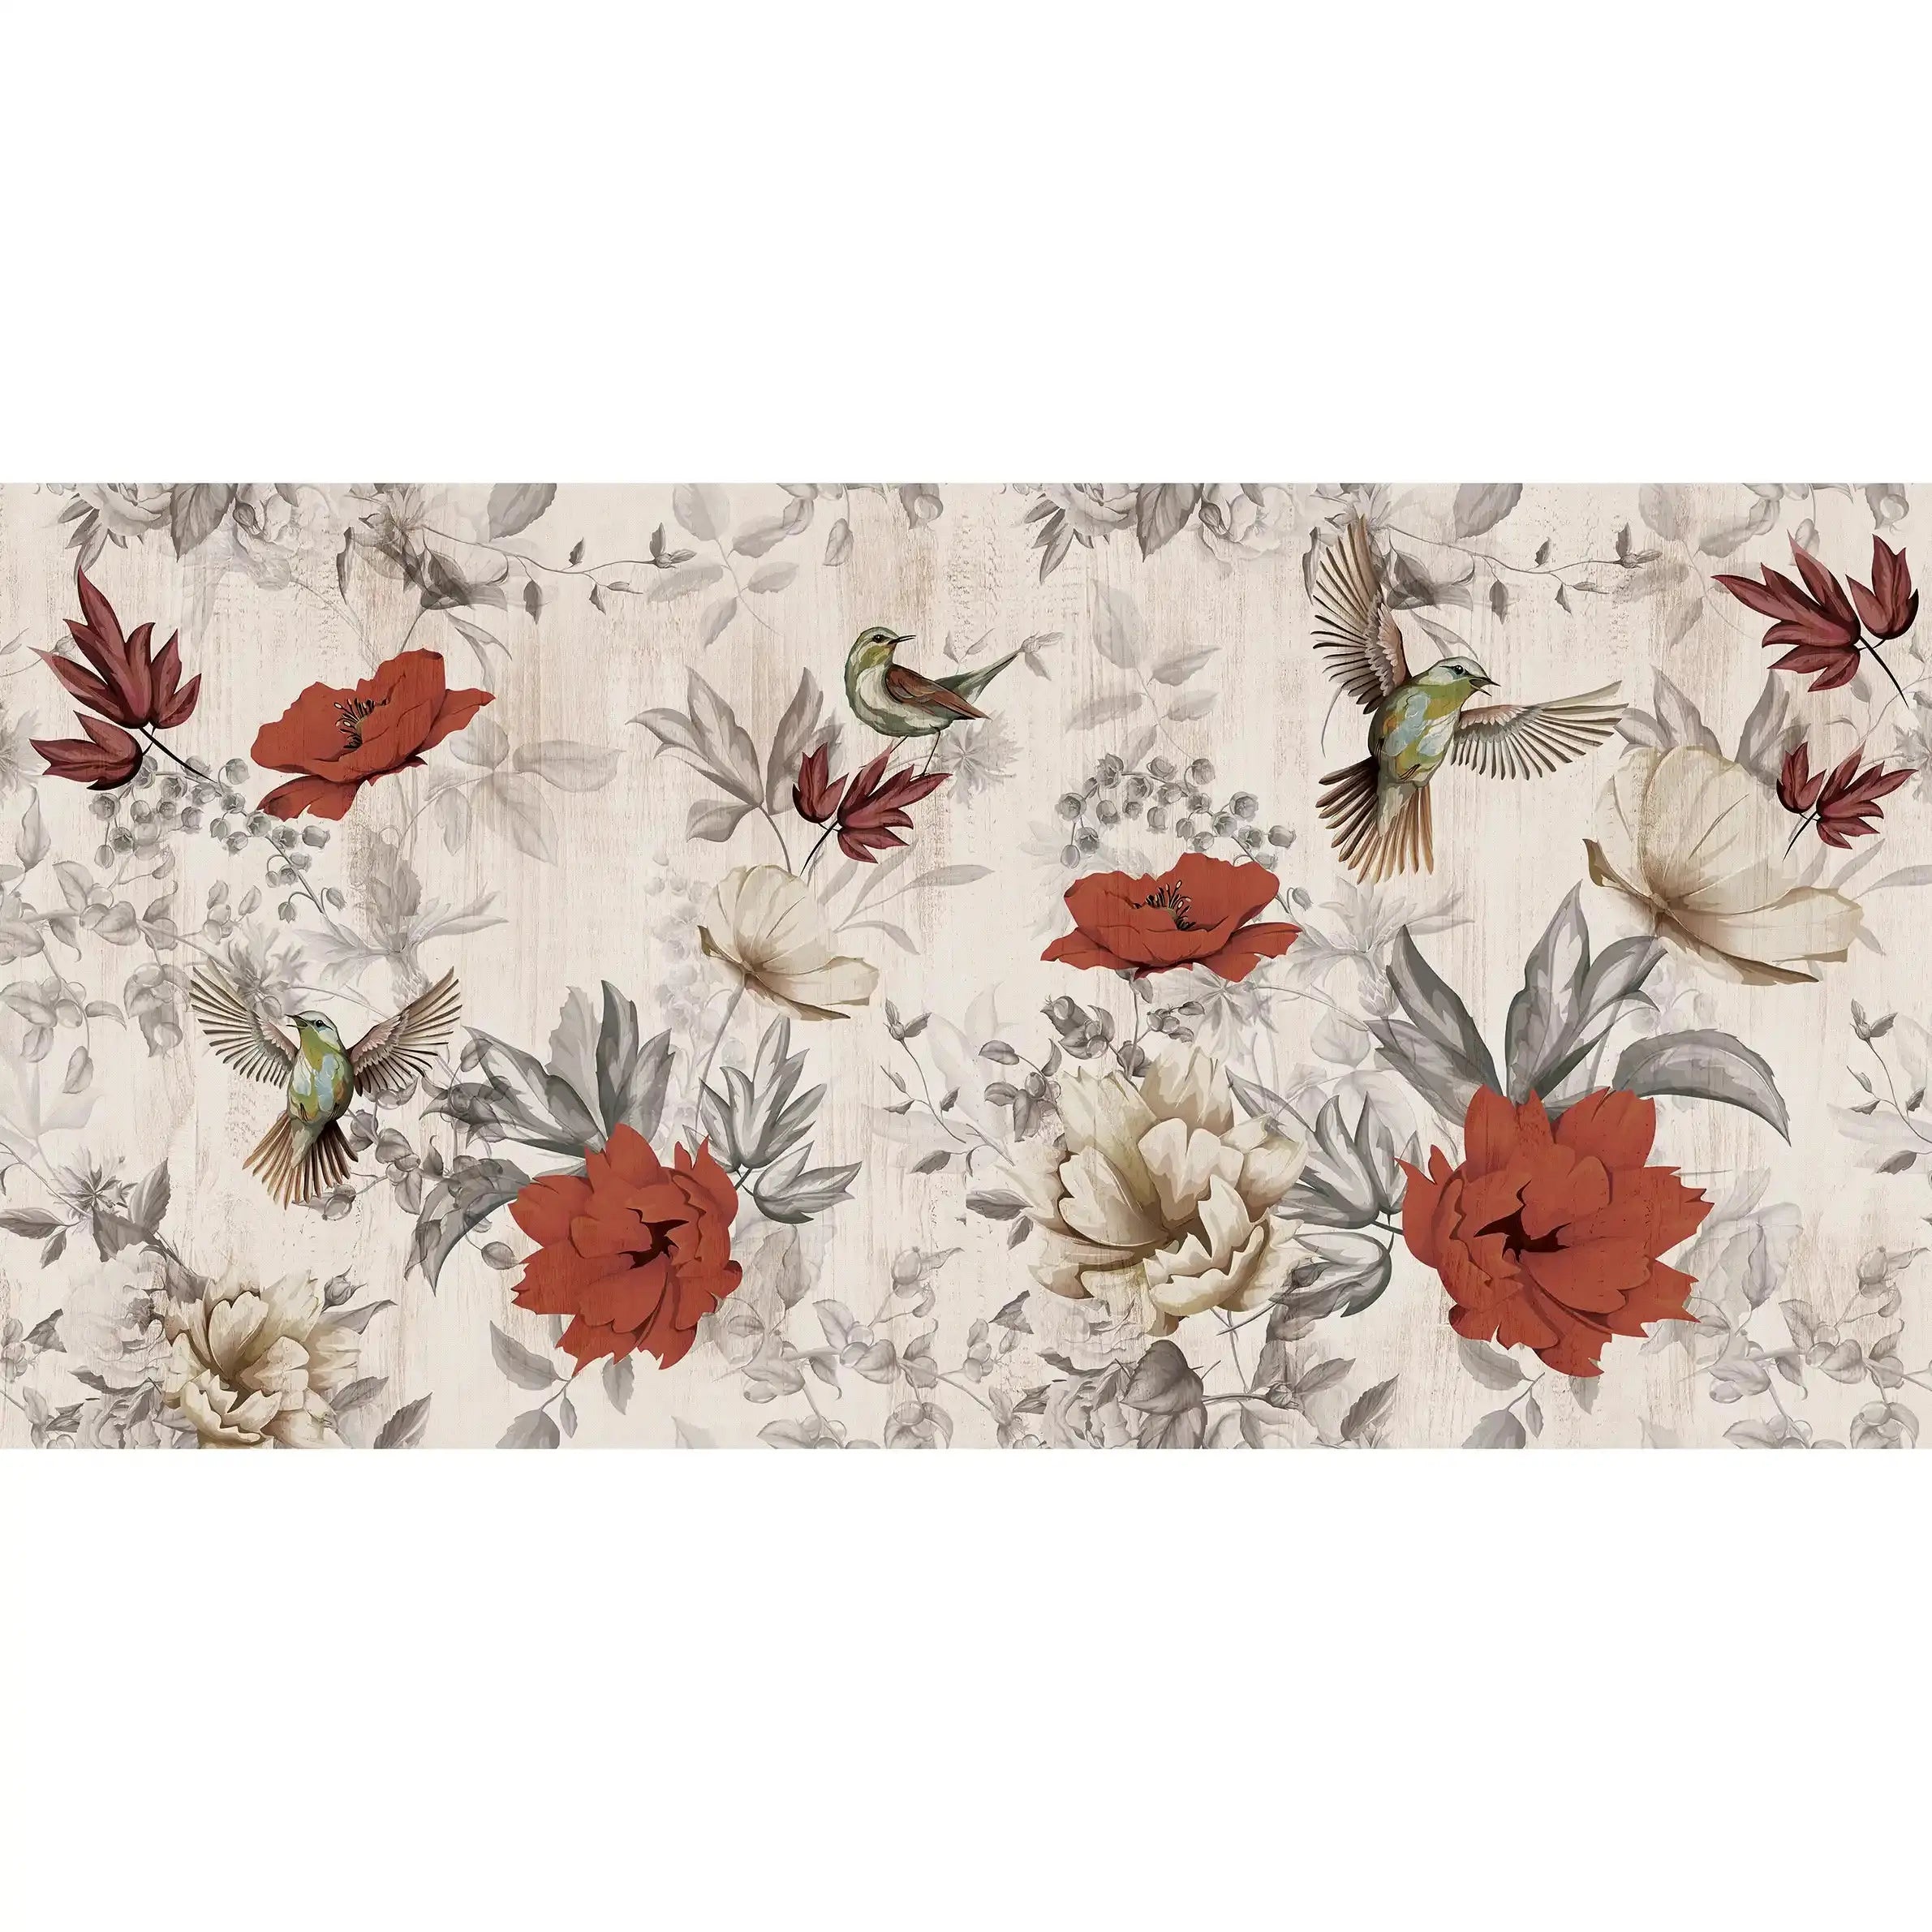 3041-B / Removable Tropical Leaf Wallpaper: Peel and Stick Vintage Red Floral Mural with Birds, Ideal for Nursery, Kitchen & Bathroom - Artevella